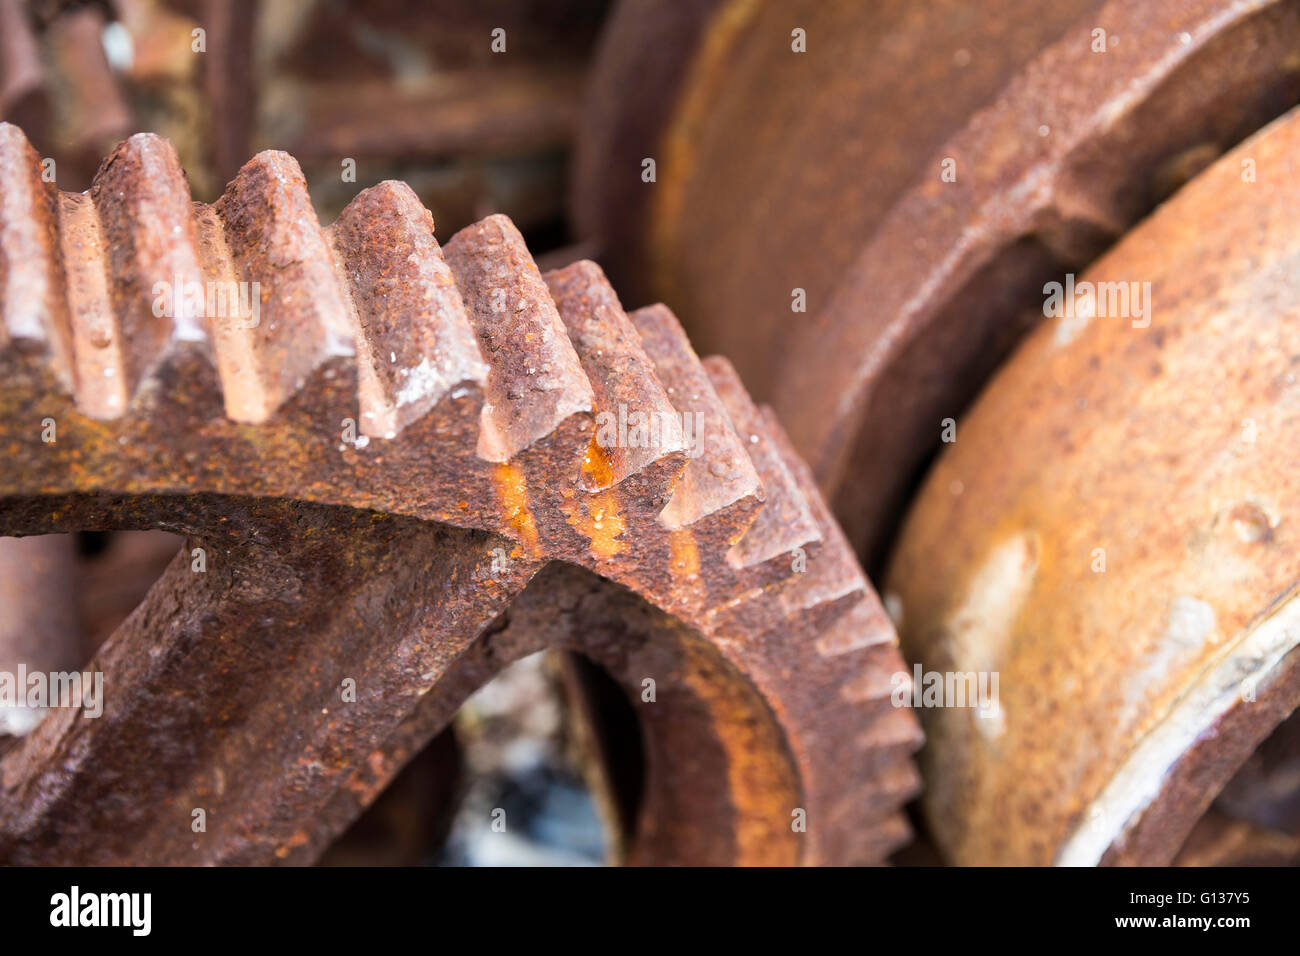 Old rusty gears for heavy industry as a machinery parts closeup Stock Photo